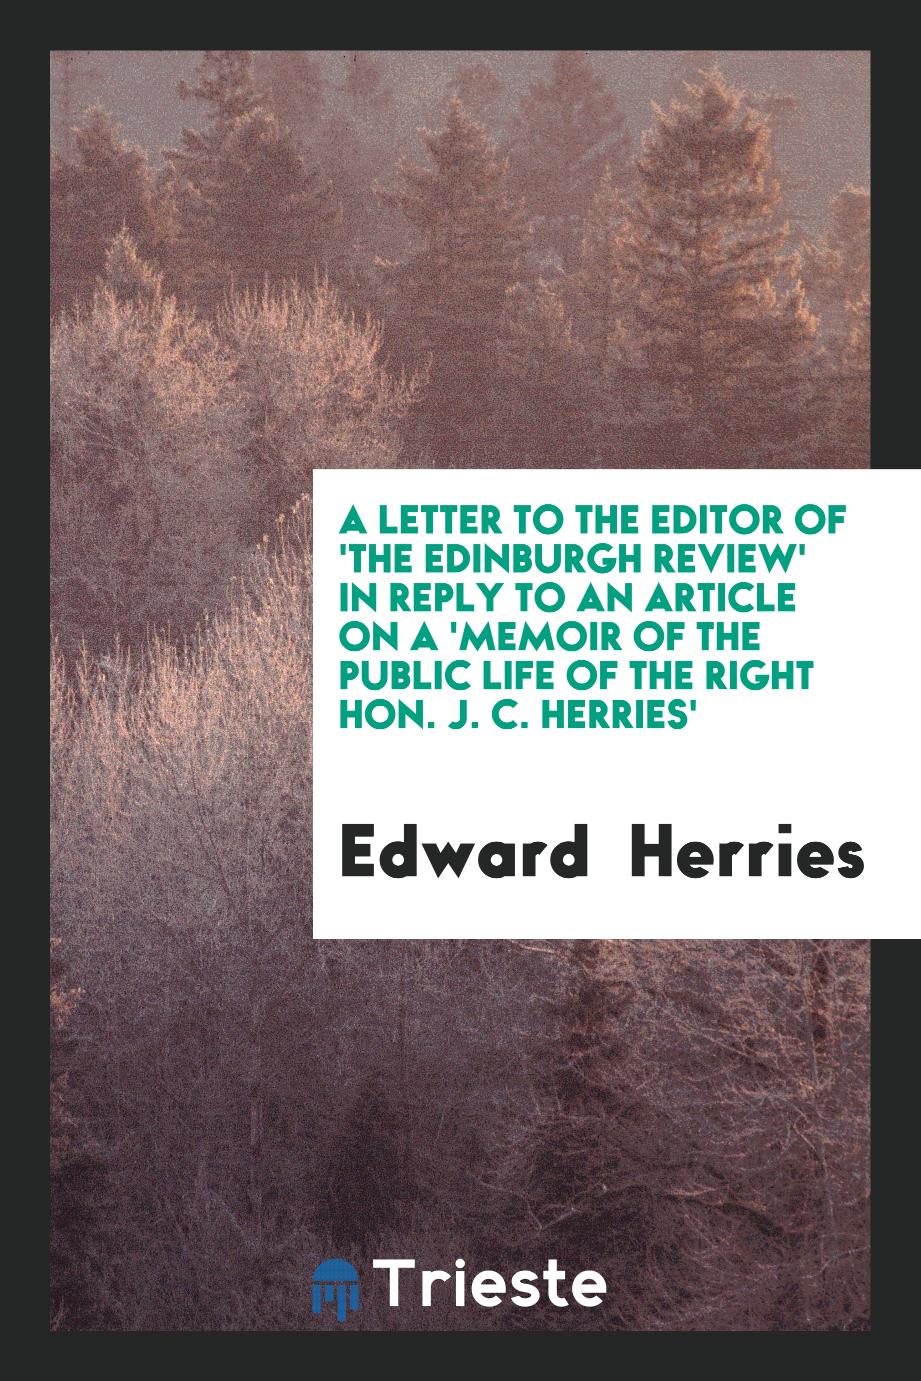 A letter to the editor of 'the Edinburgh review' in reply to an article on a 'memoir of the public life of the right hon. J. C. Herries'